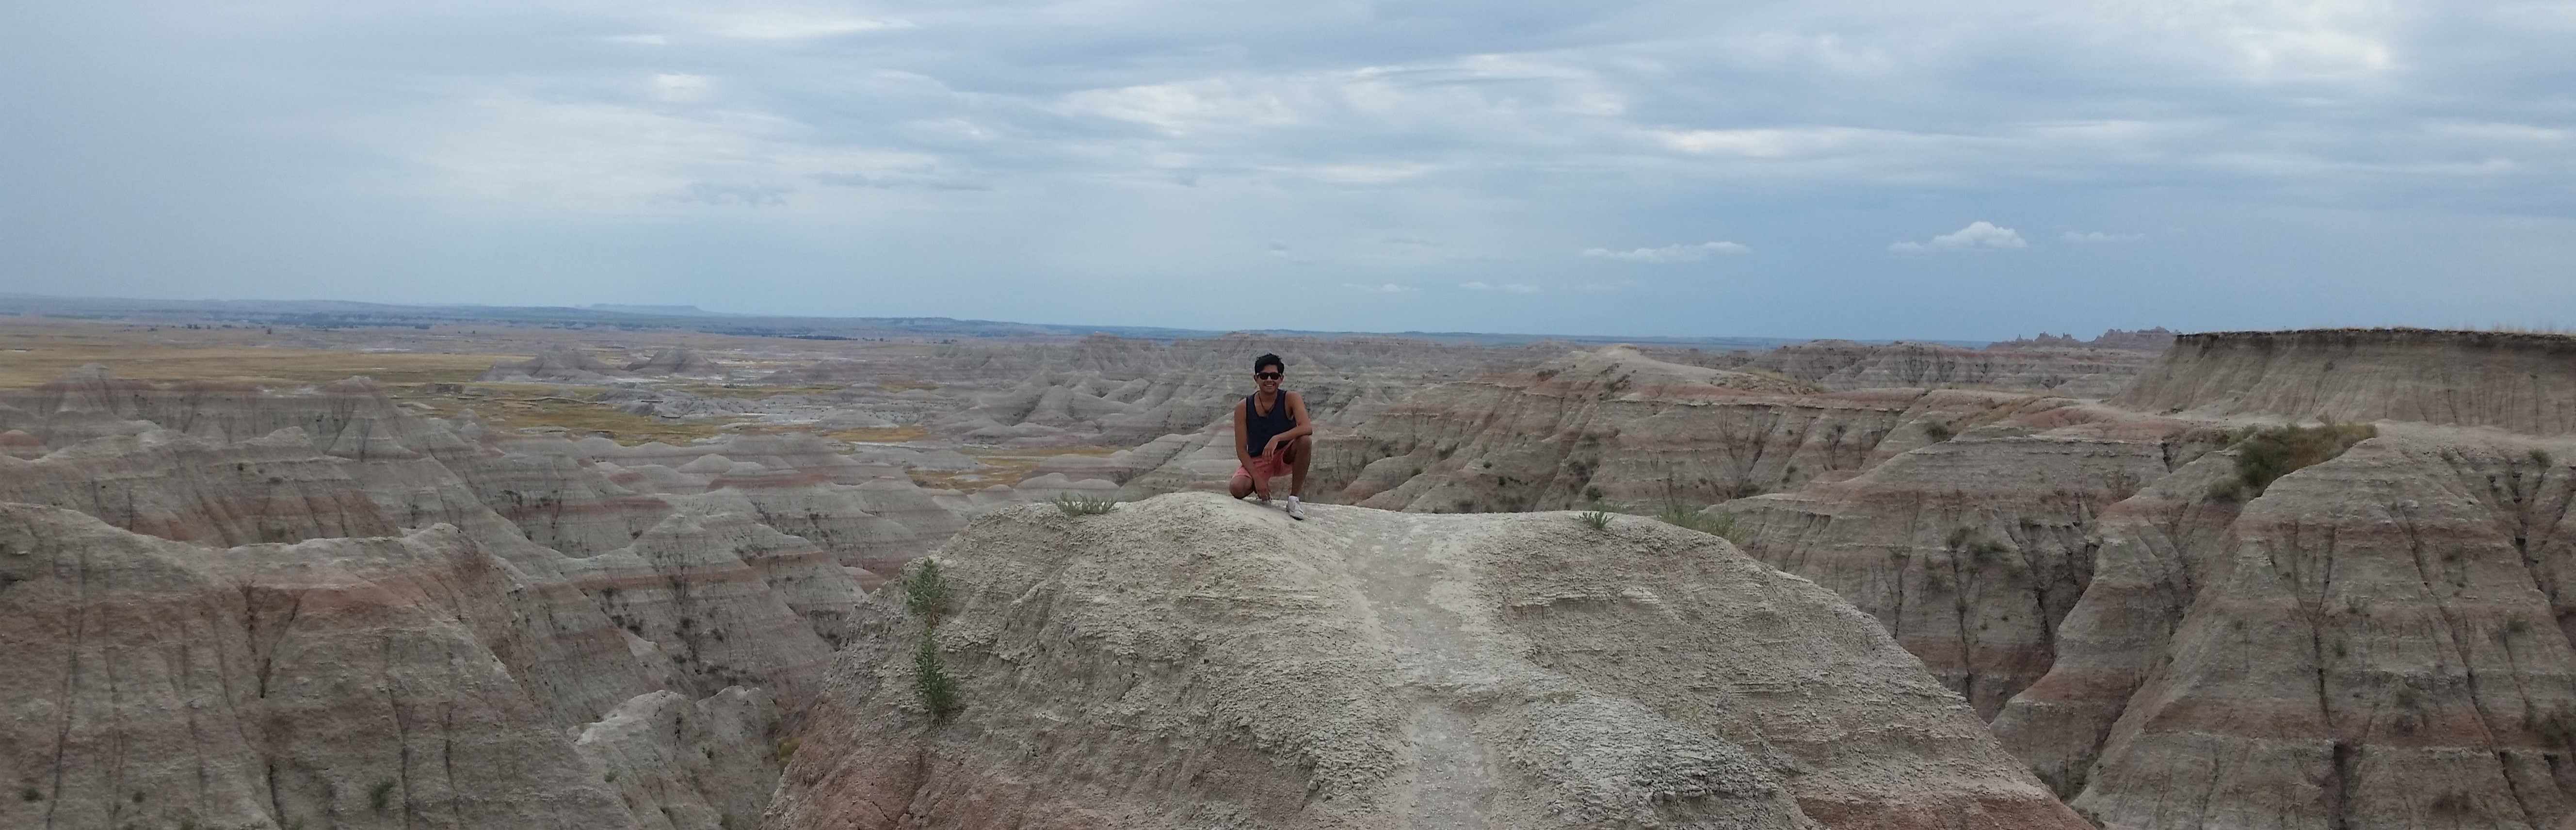 A nice picture of me in the badlands :)